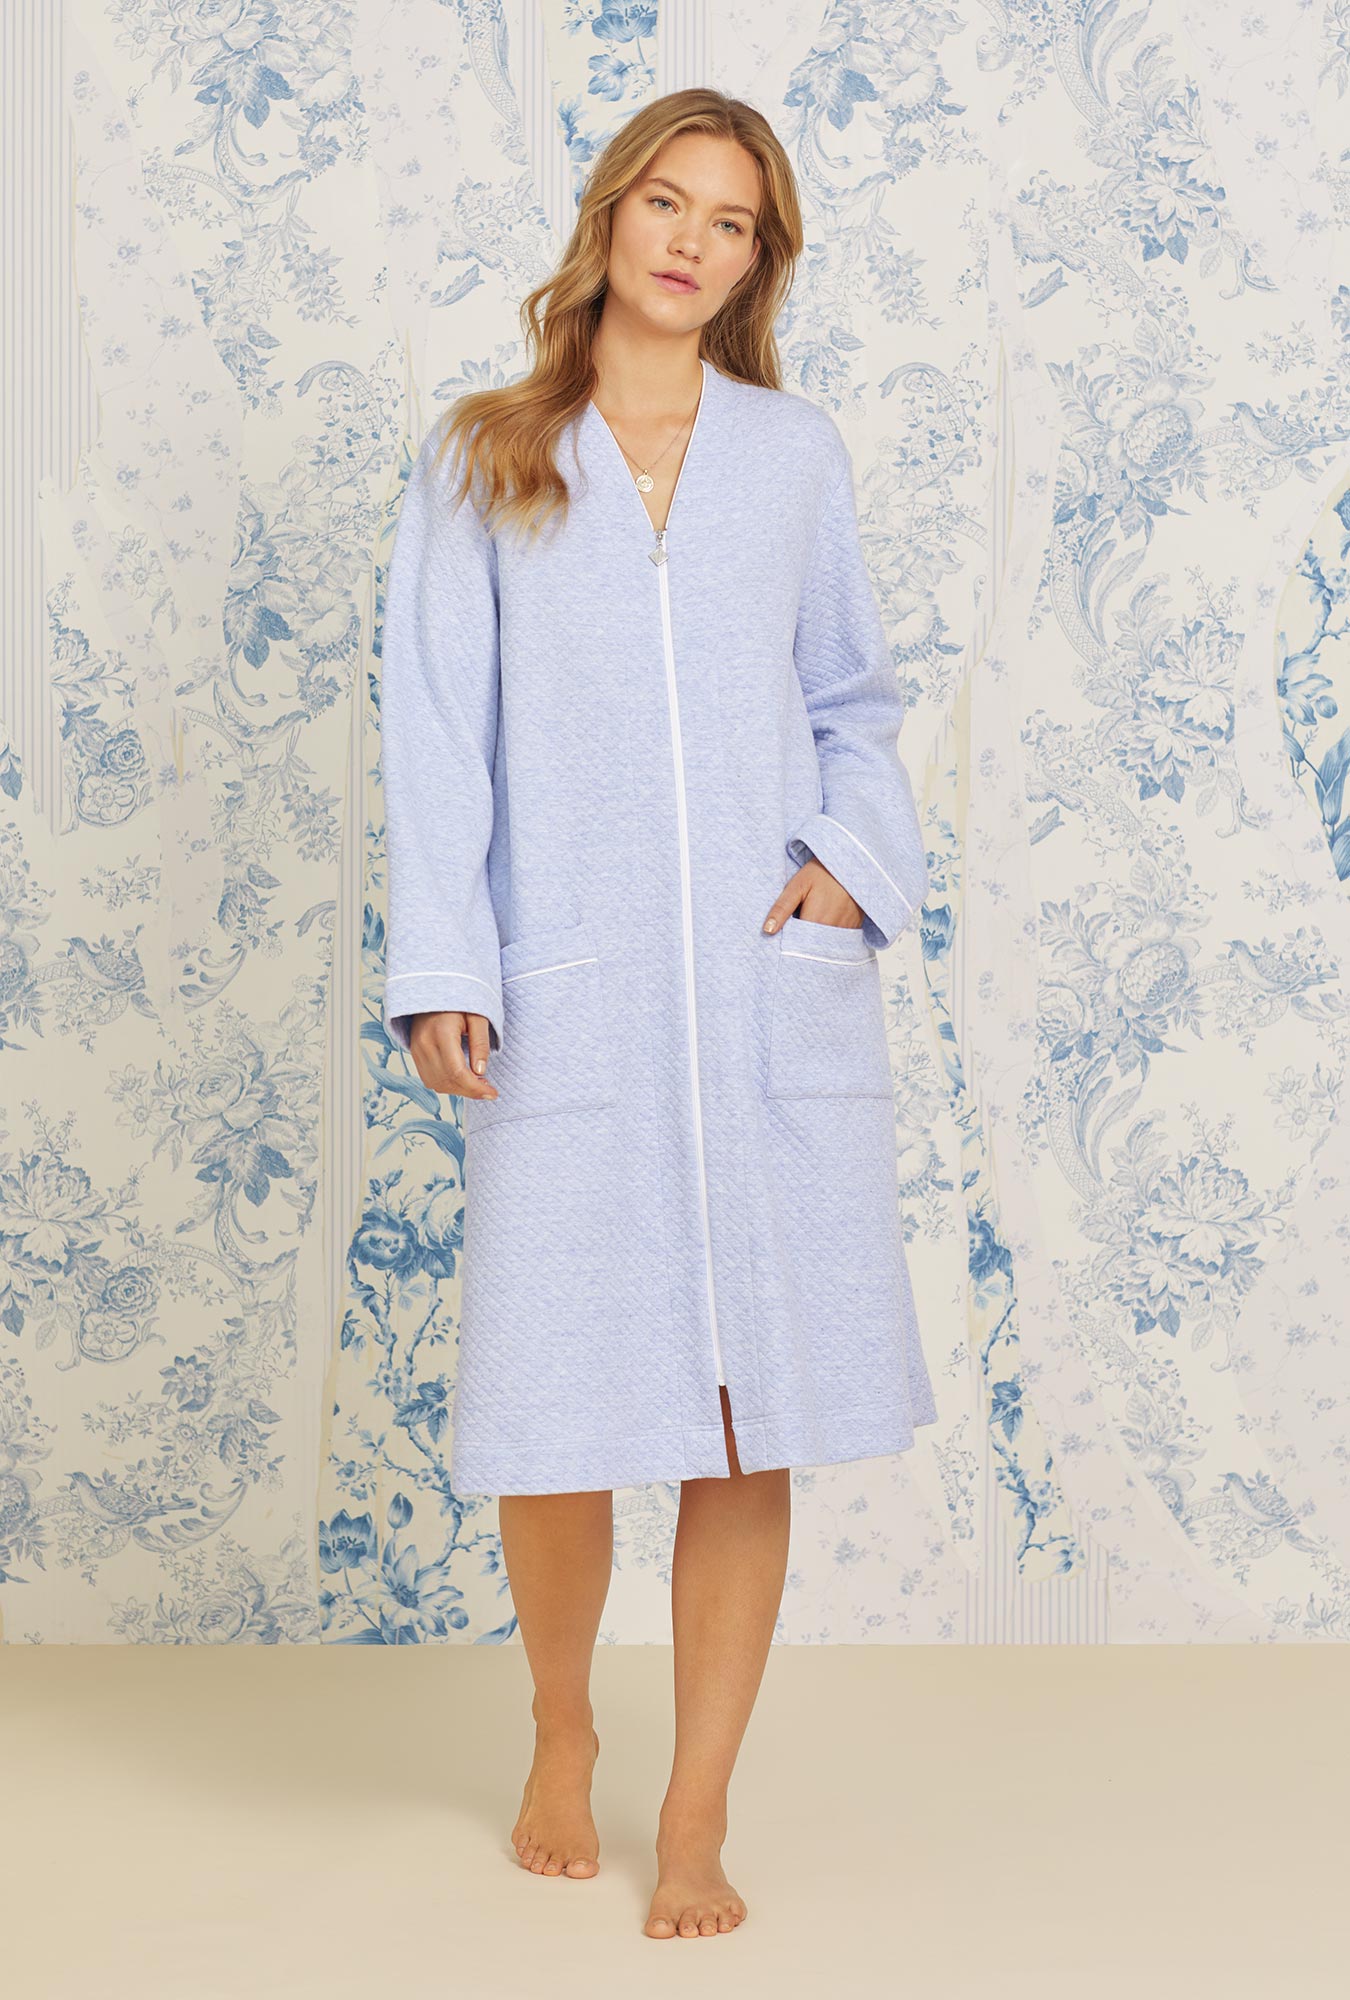 Eileen West Button-Front Woven Robe & Reviews